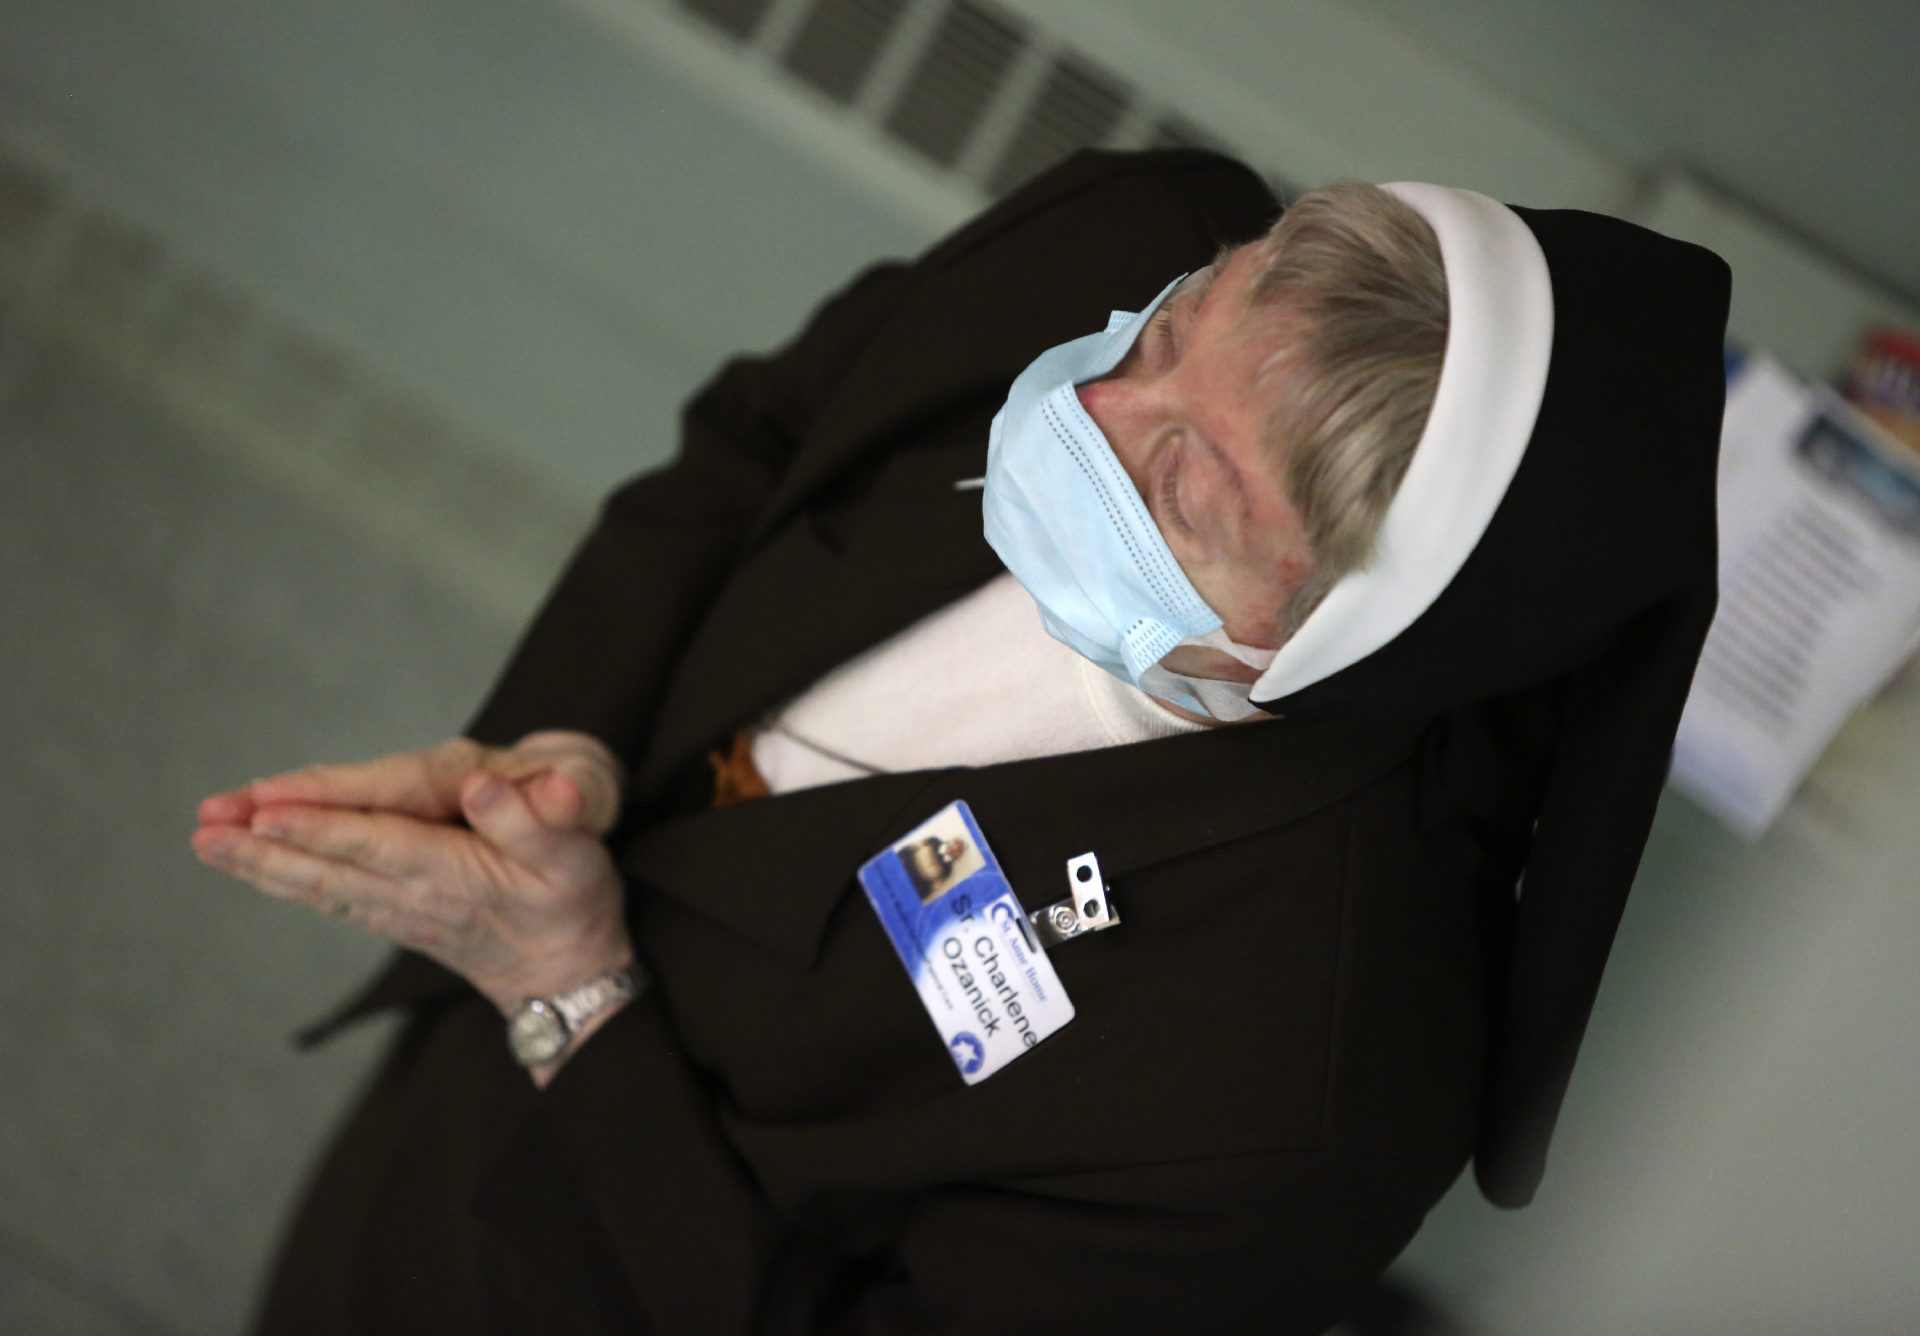 Sister Mary Charlene Ozanick, of the Felician Sisters of North America, prays during morning Mass at St. Anne Home in Greensburg, Pa., on Thursday, March 25, 2021.